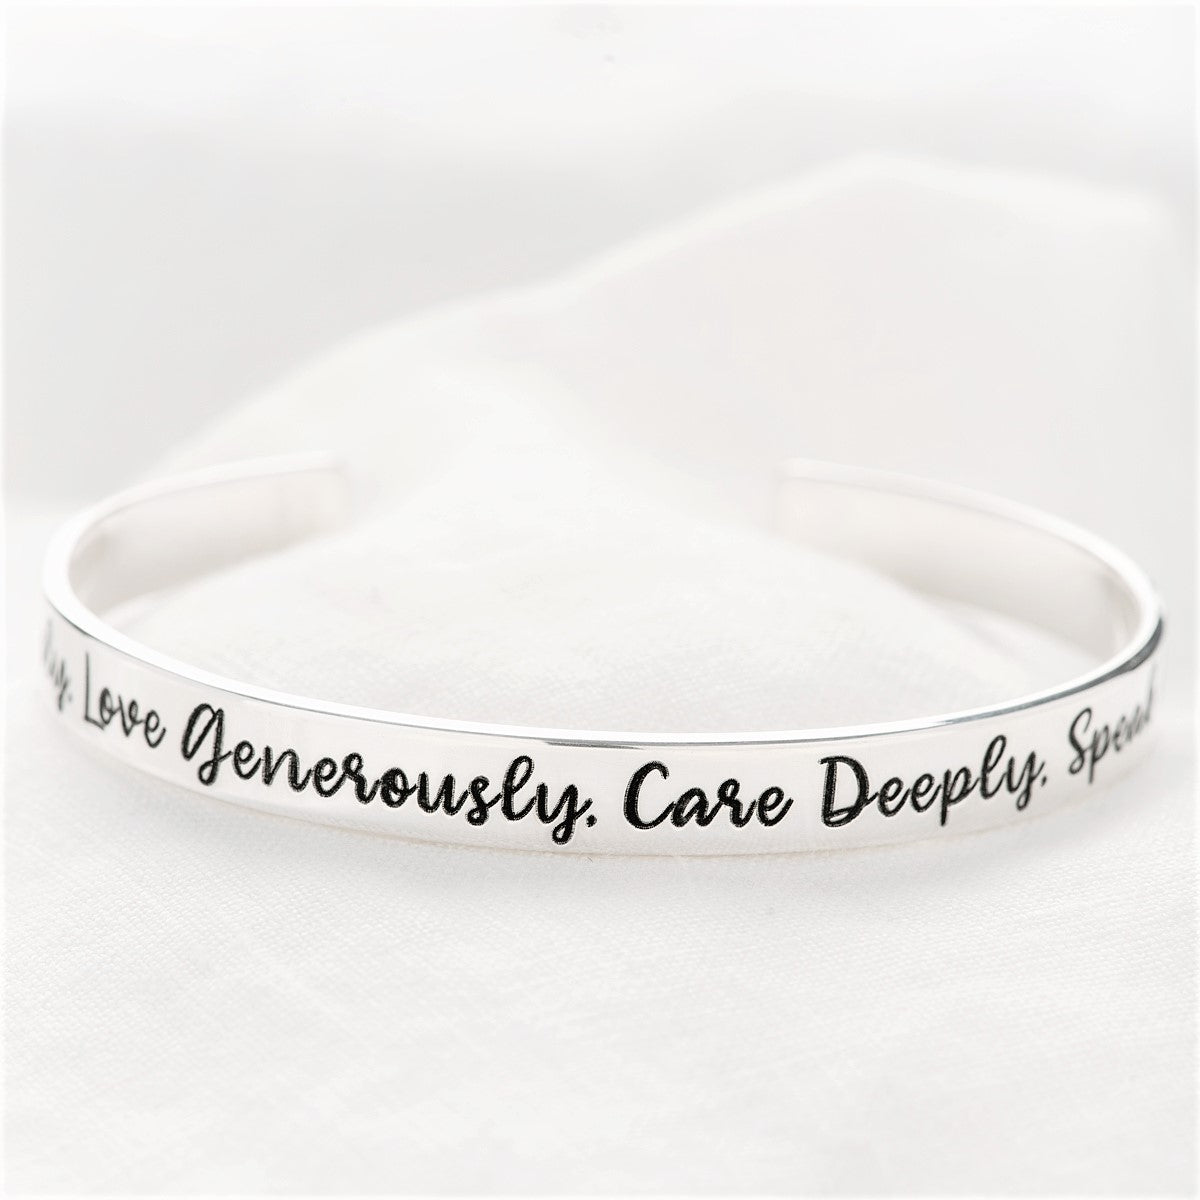 Live Simply, Love Generously, Care Deeply, Speak Kindly...and Leave the Rest to God Cuff Bracelet | Sterling Silver or 14k Gold